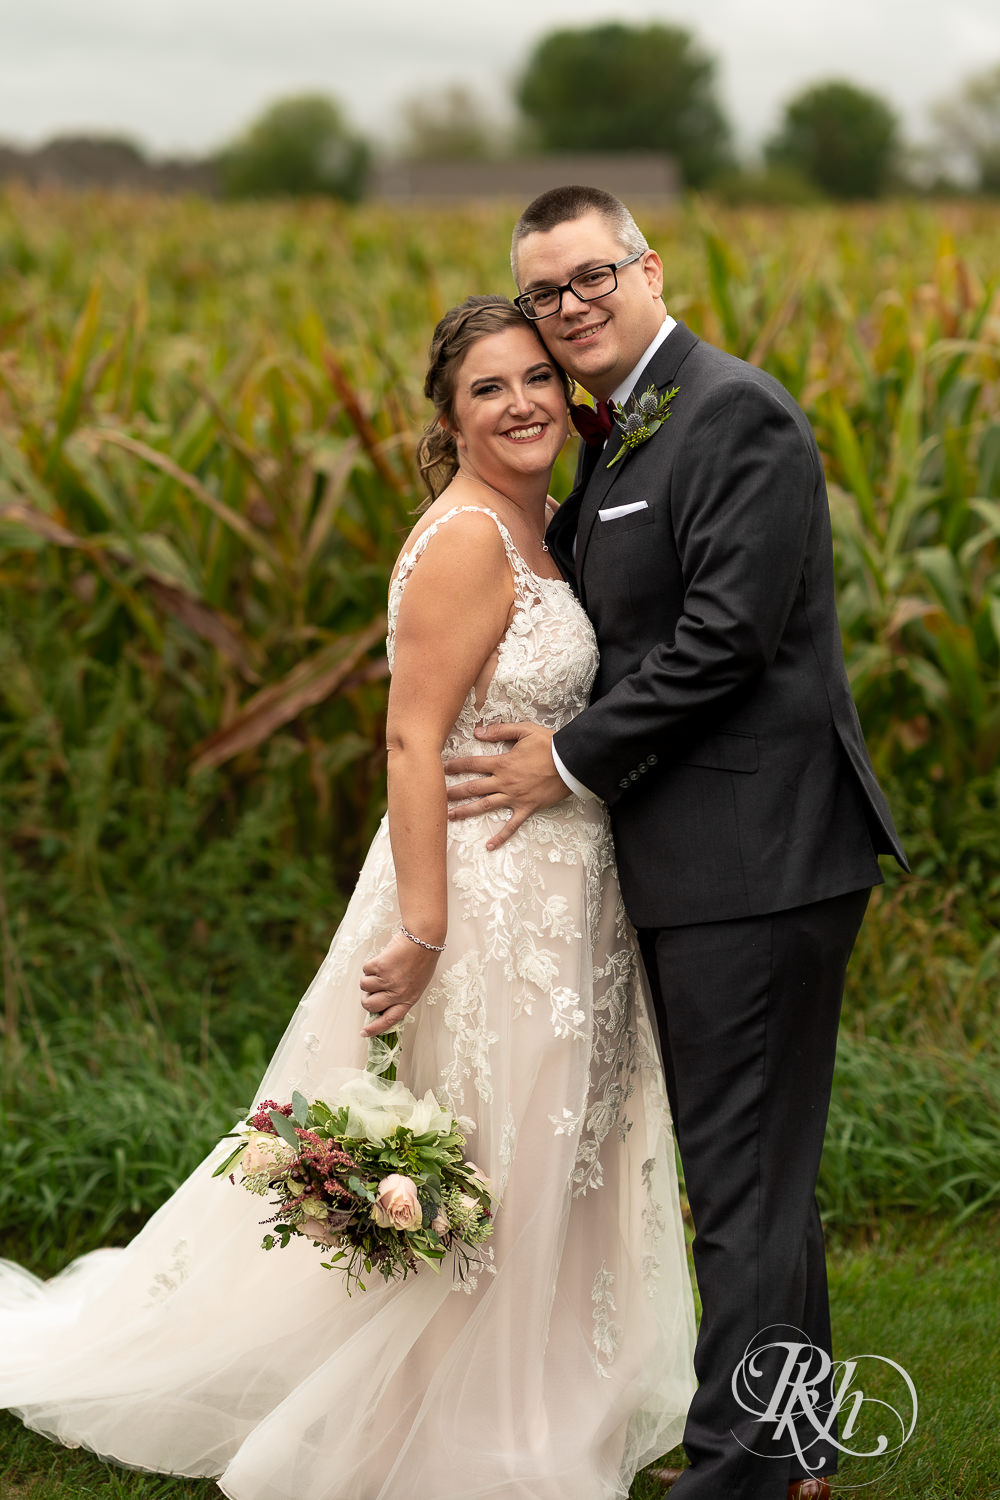 Bride and groom looking at camera in front of cornfield at Glenhaven Events in Farmington, Minnesota.